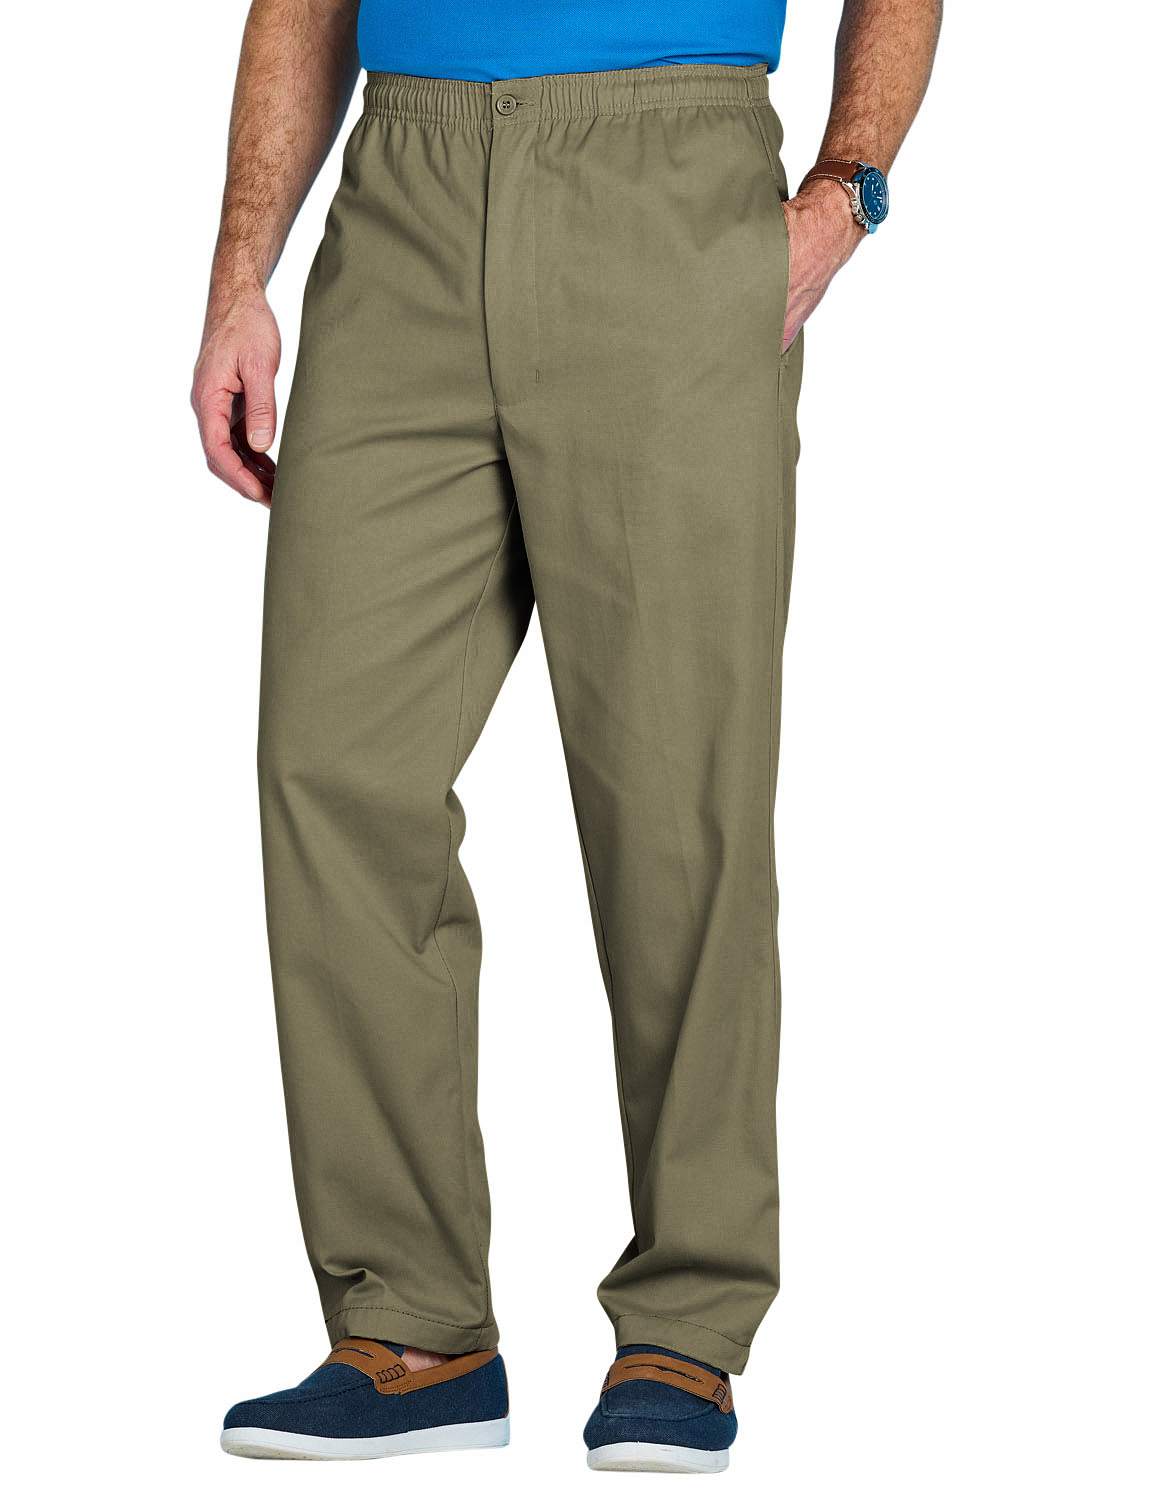 Pegasus Easy Pull On Cotton Trouser | Chums